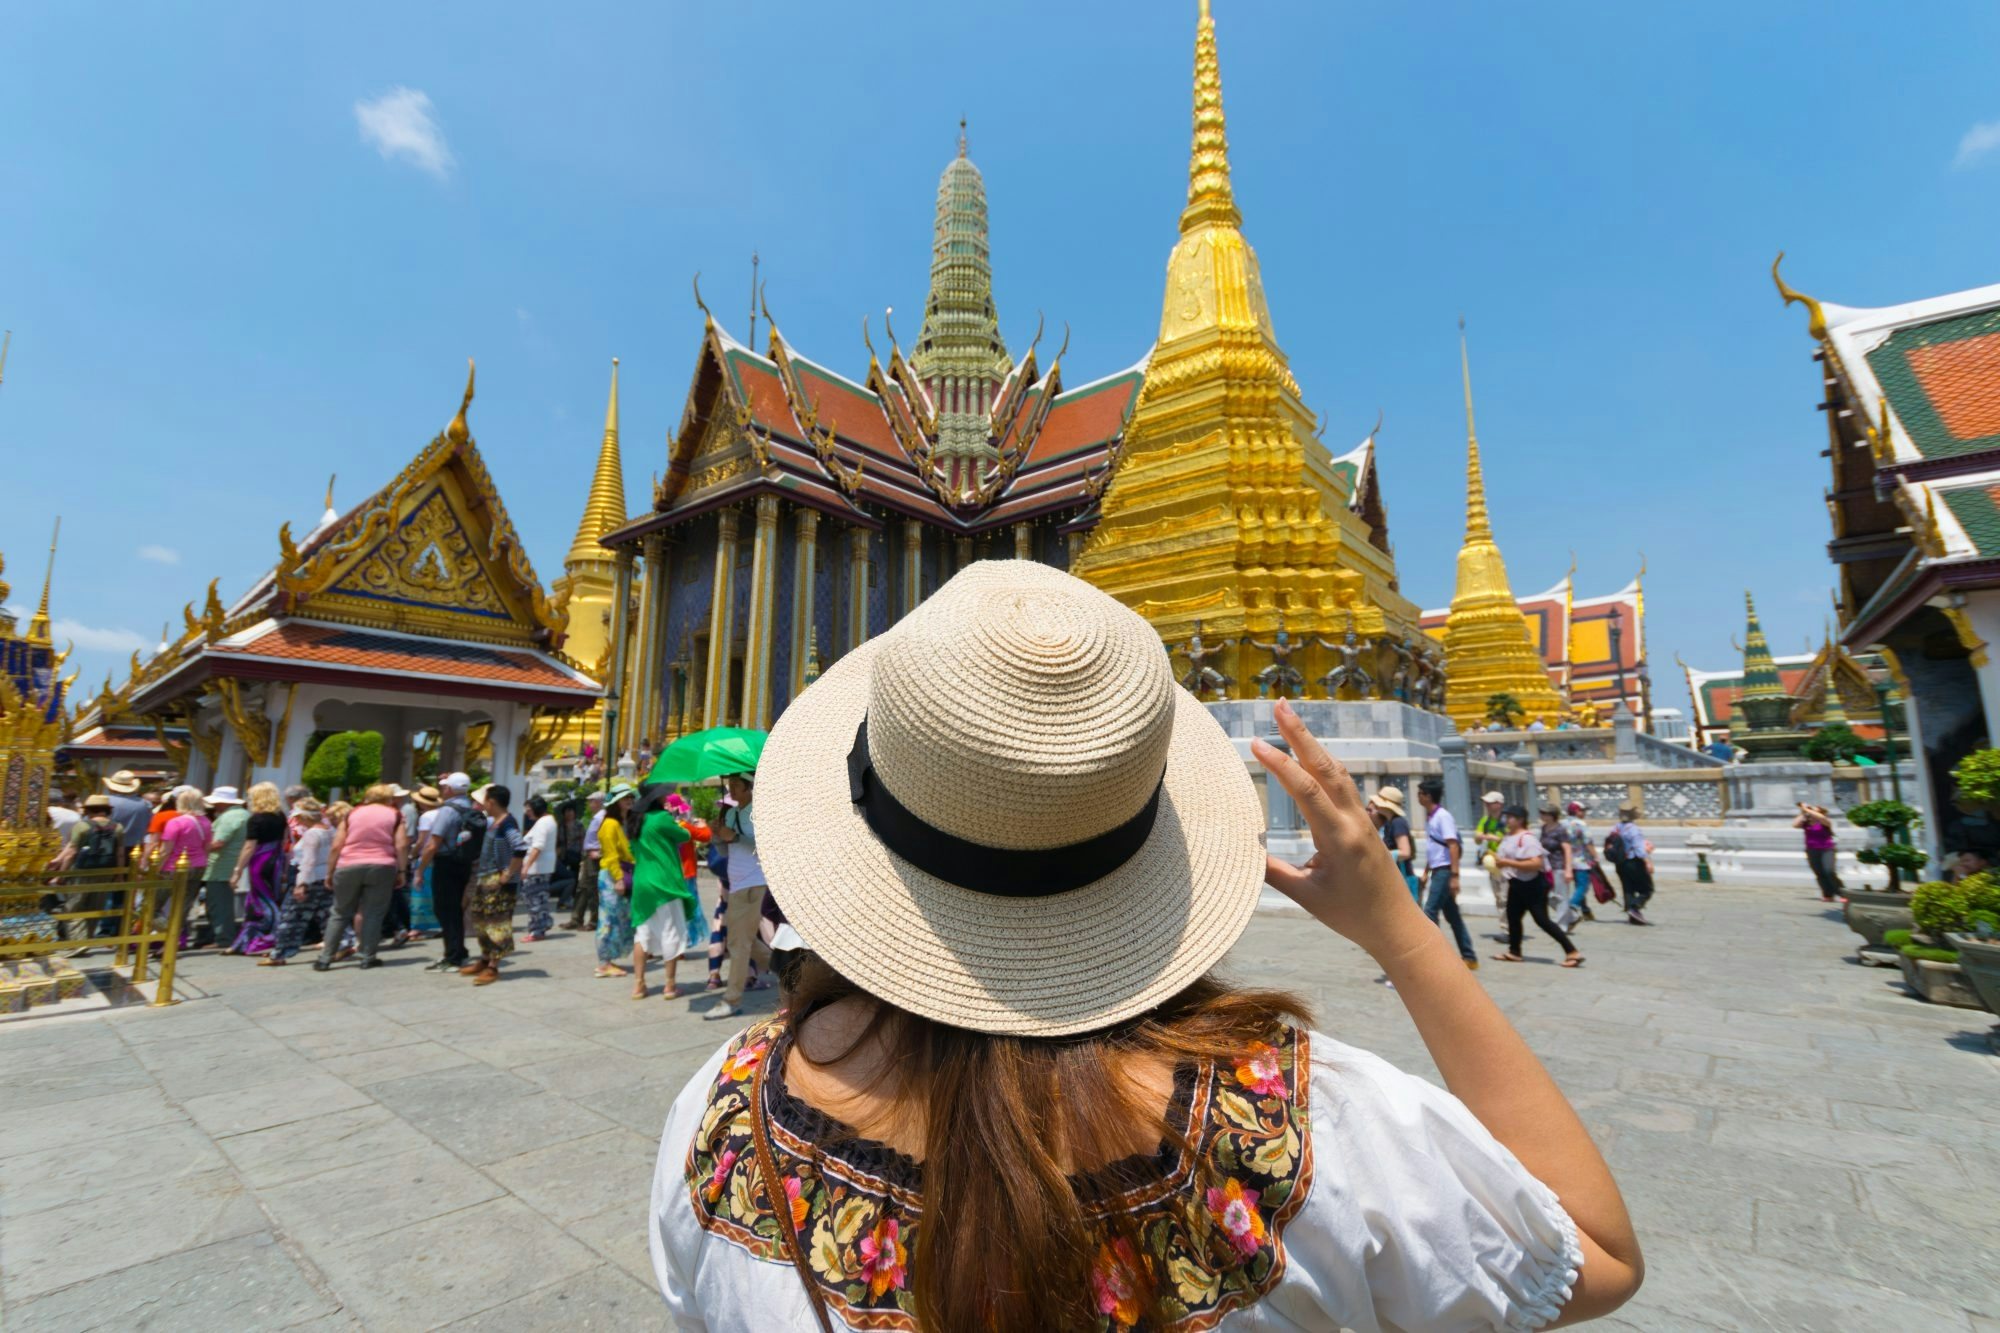 Many tourist attractions in Thailand will be closed for 30 days. (noina/Shutterstock.com)